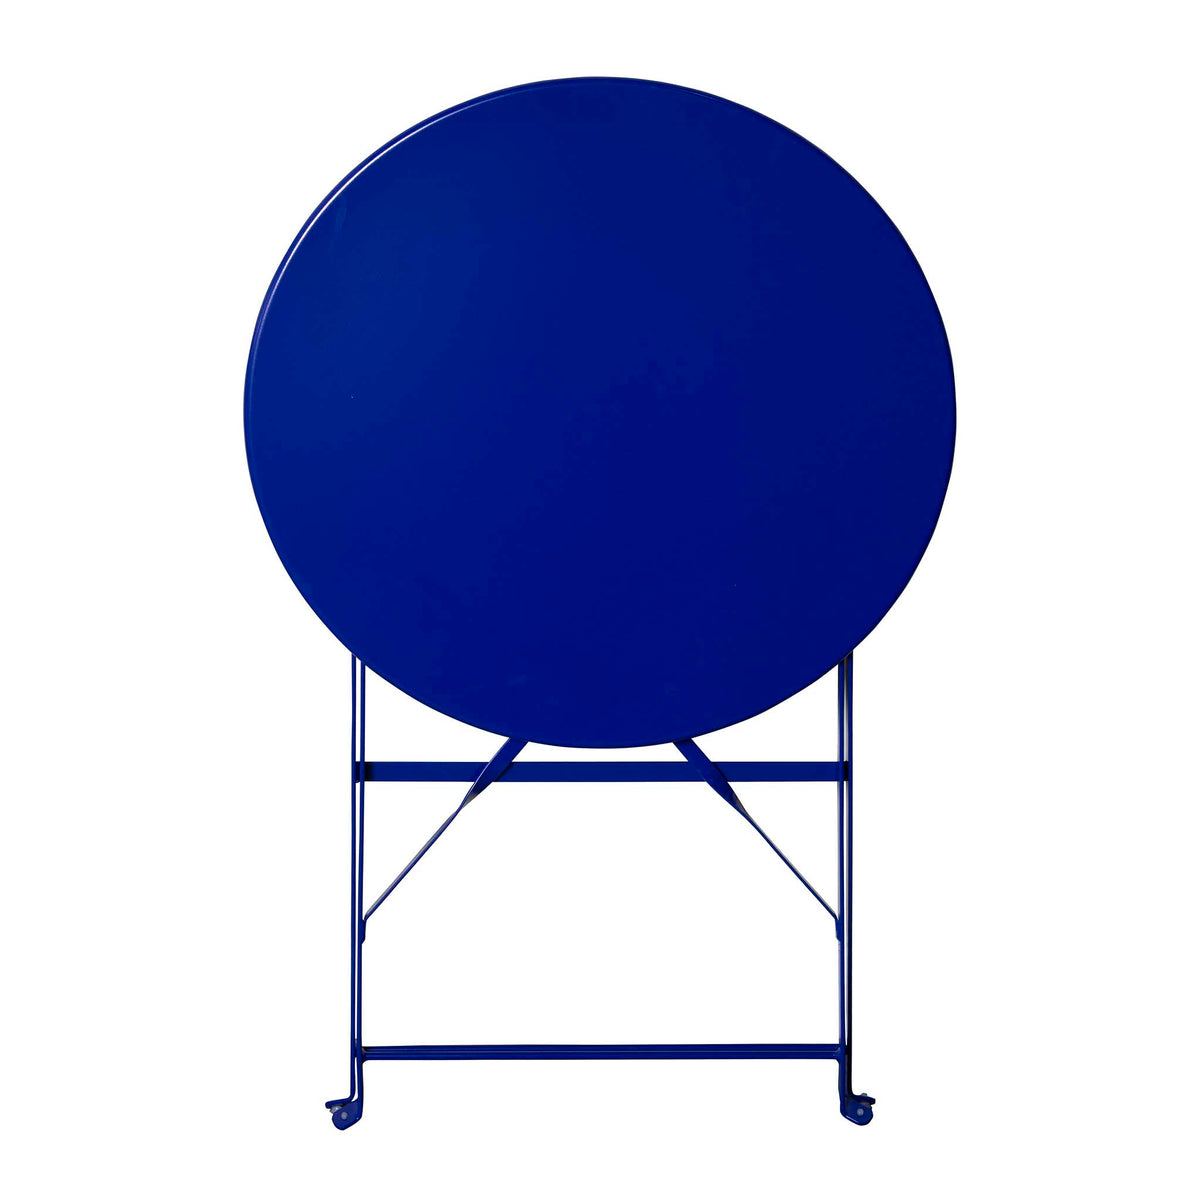 Bistro Blue Folding Table and Two Chairs - Table folded